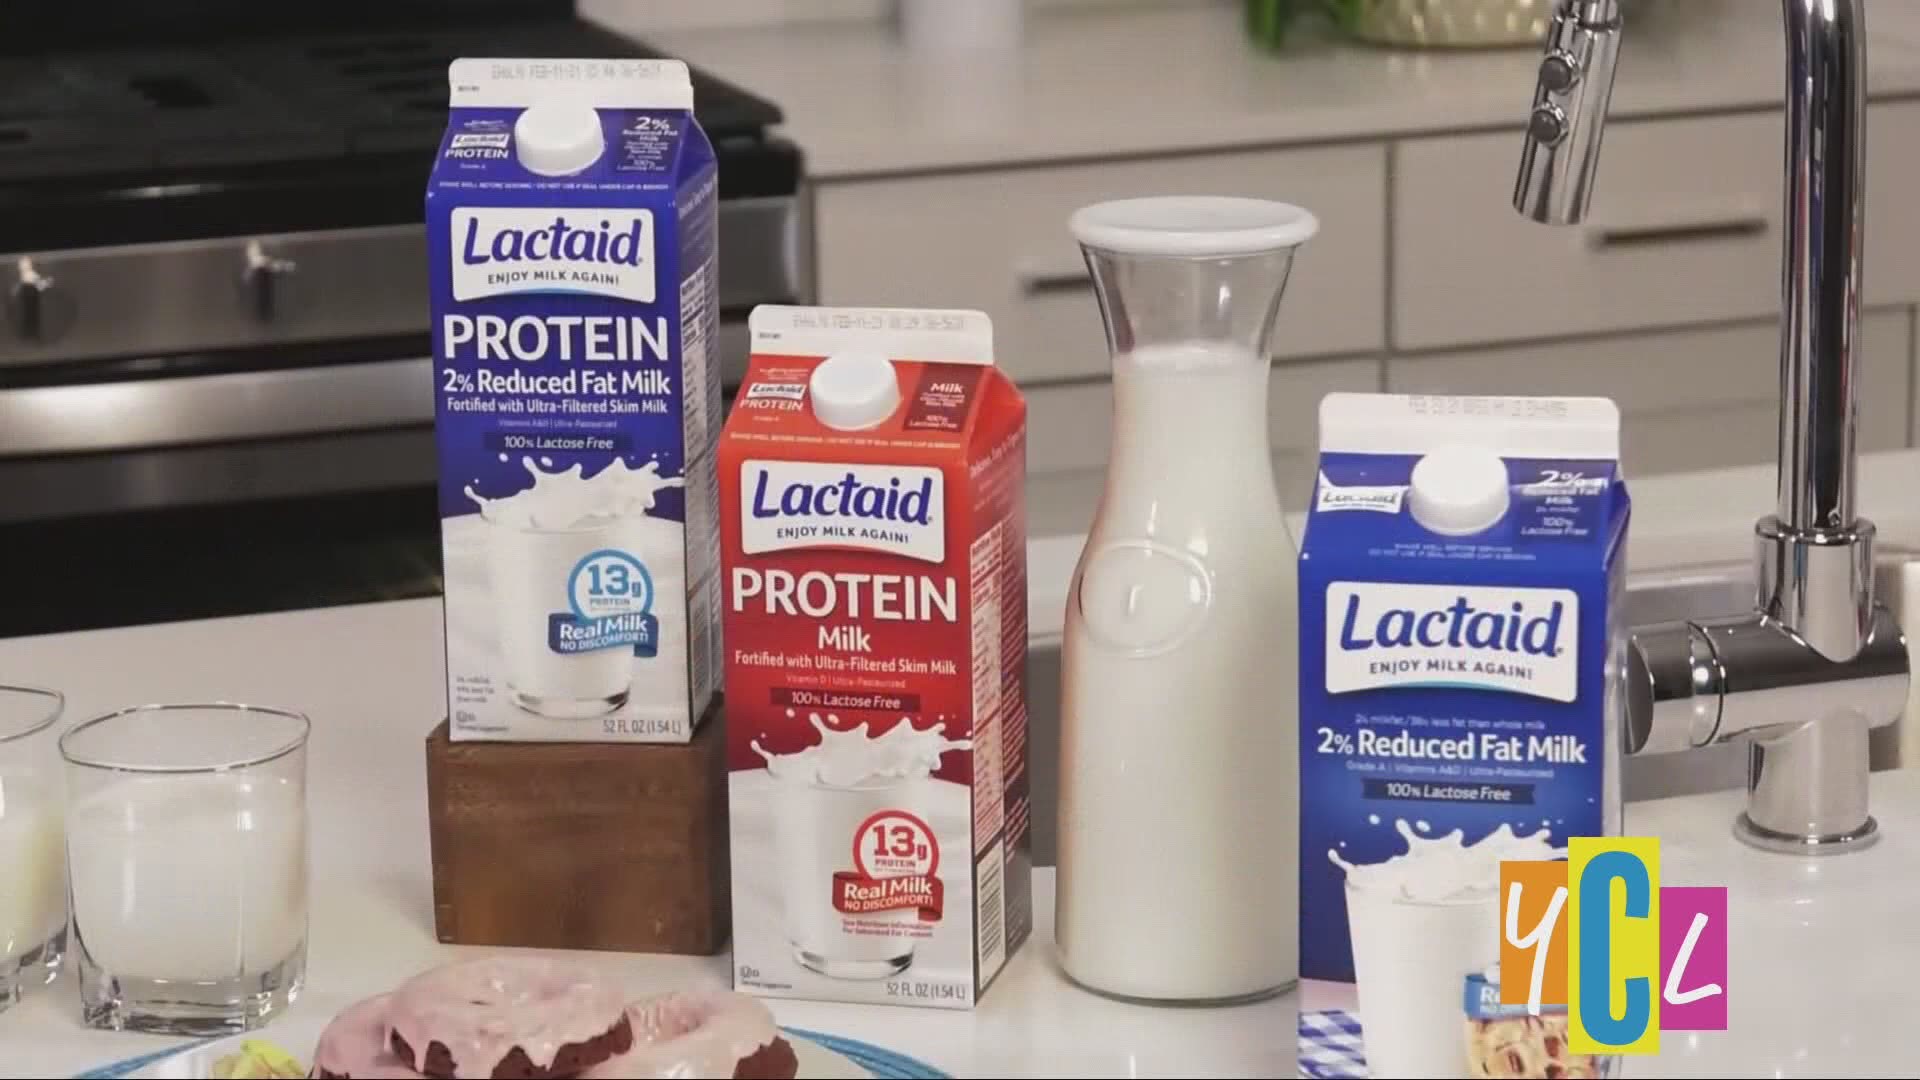 Three new dairy-filled, lactose-free recipes - including donuts, with Chef Jocelyn Delk Adams. This segment was paid for by Lactaid.